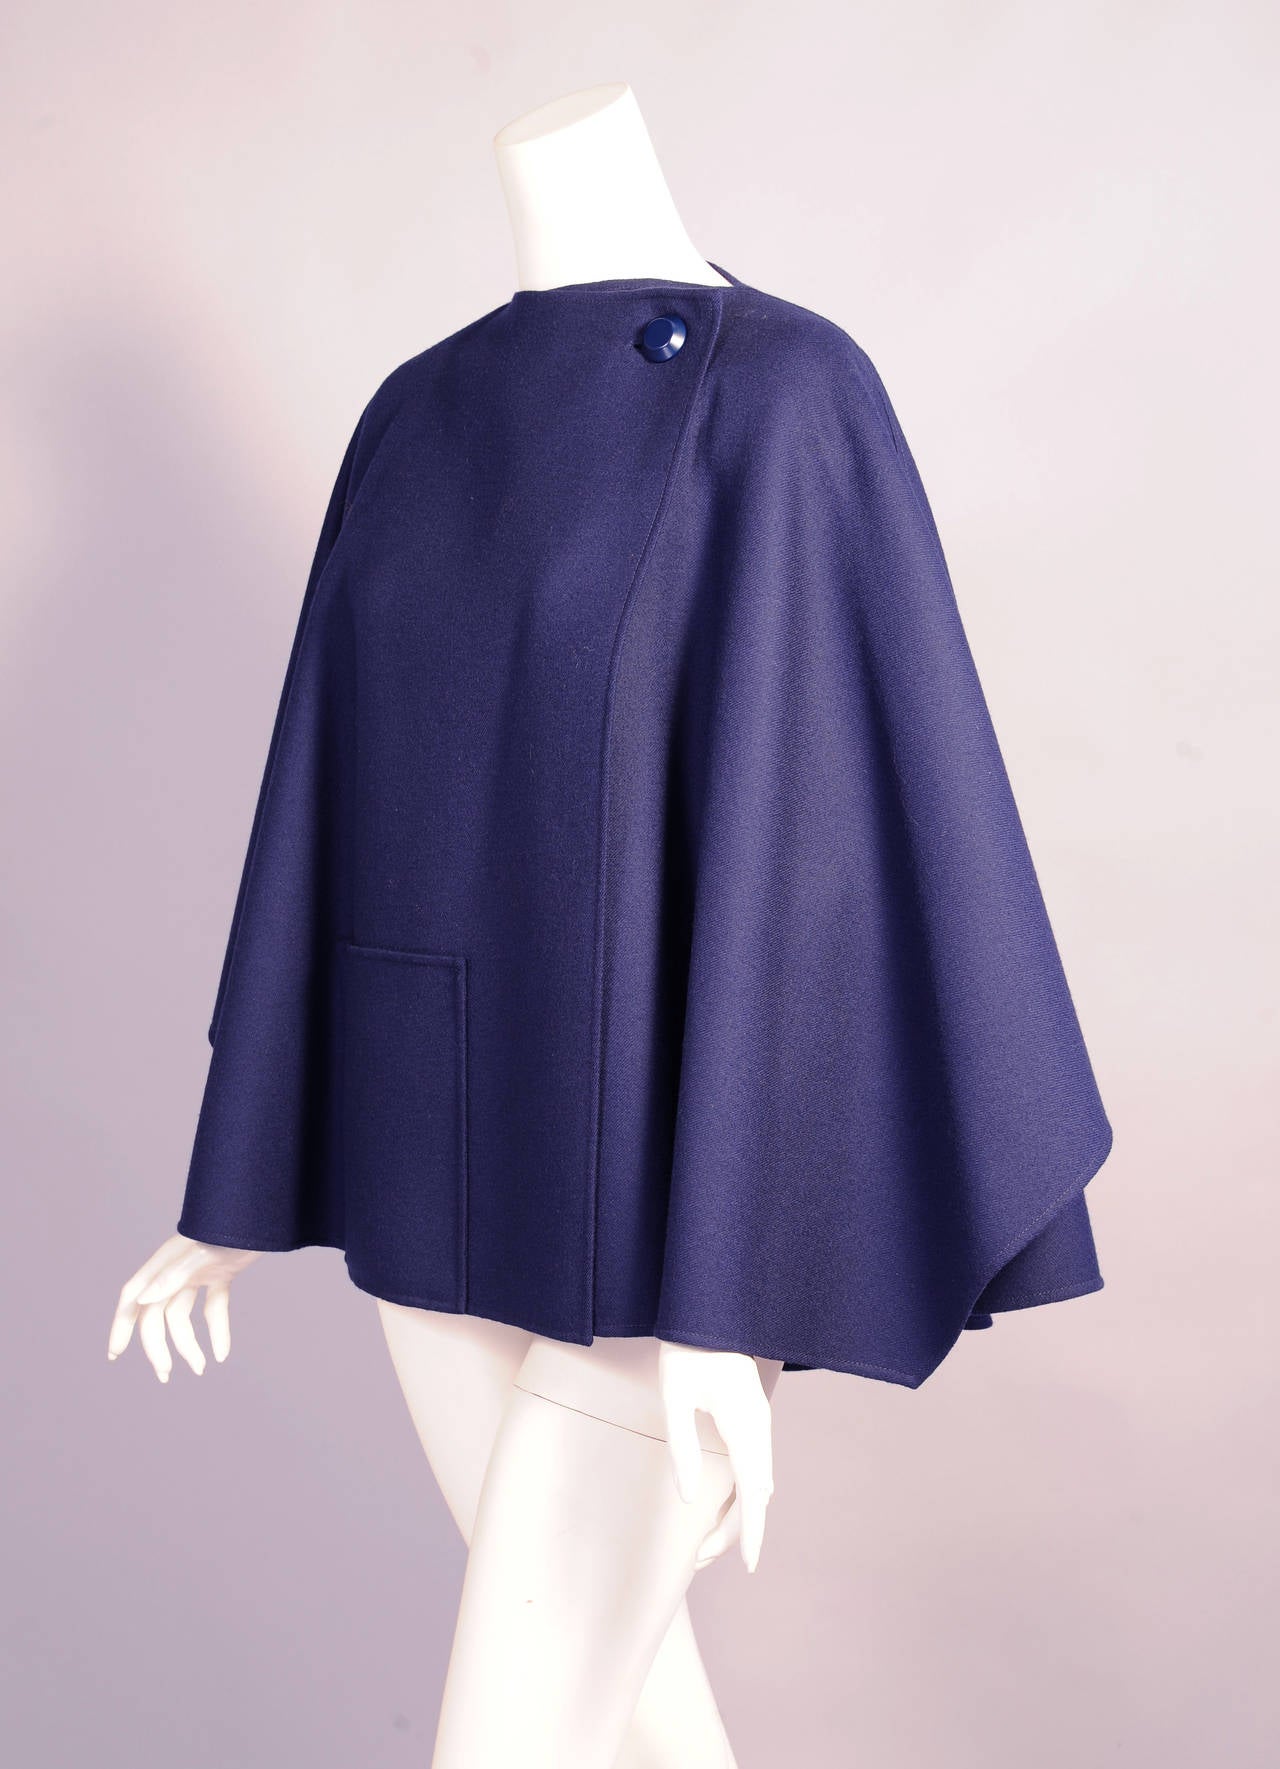 This striking short cape is spare and voluminous at the same time. The design is classic Madame Gres and the single button closure and off center single patch pocket are clean and elegant. The unlined cape is in excellent condition. One size fits